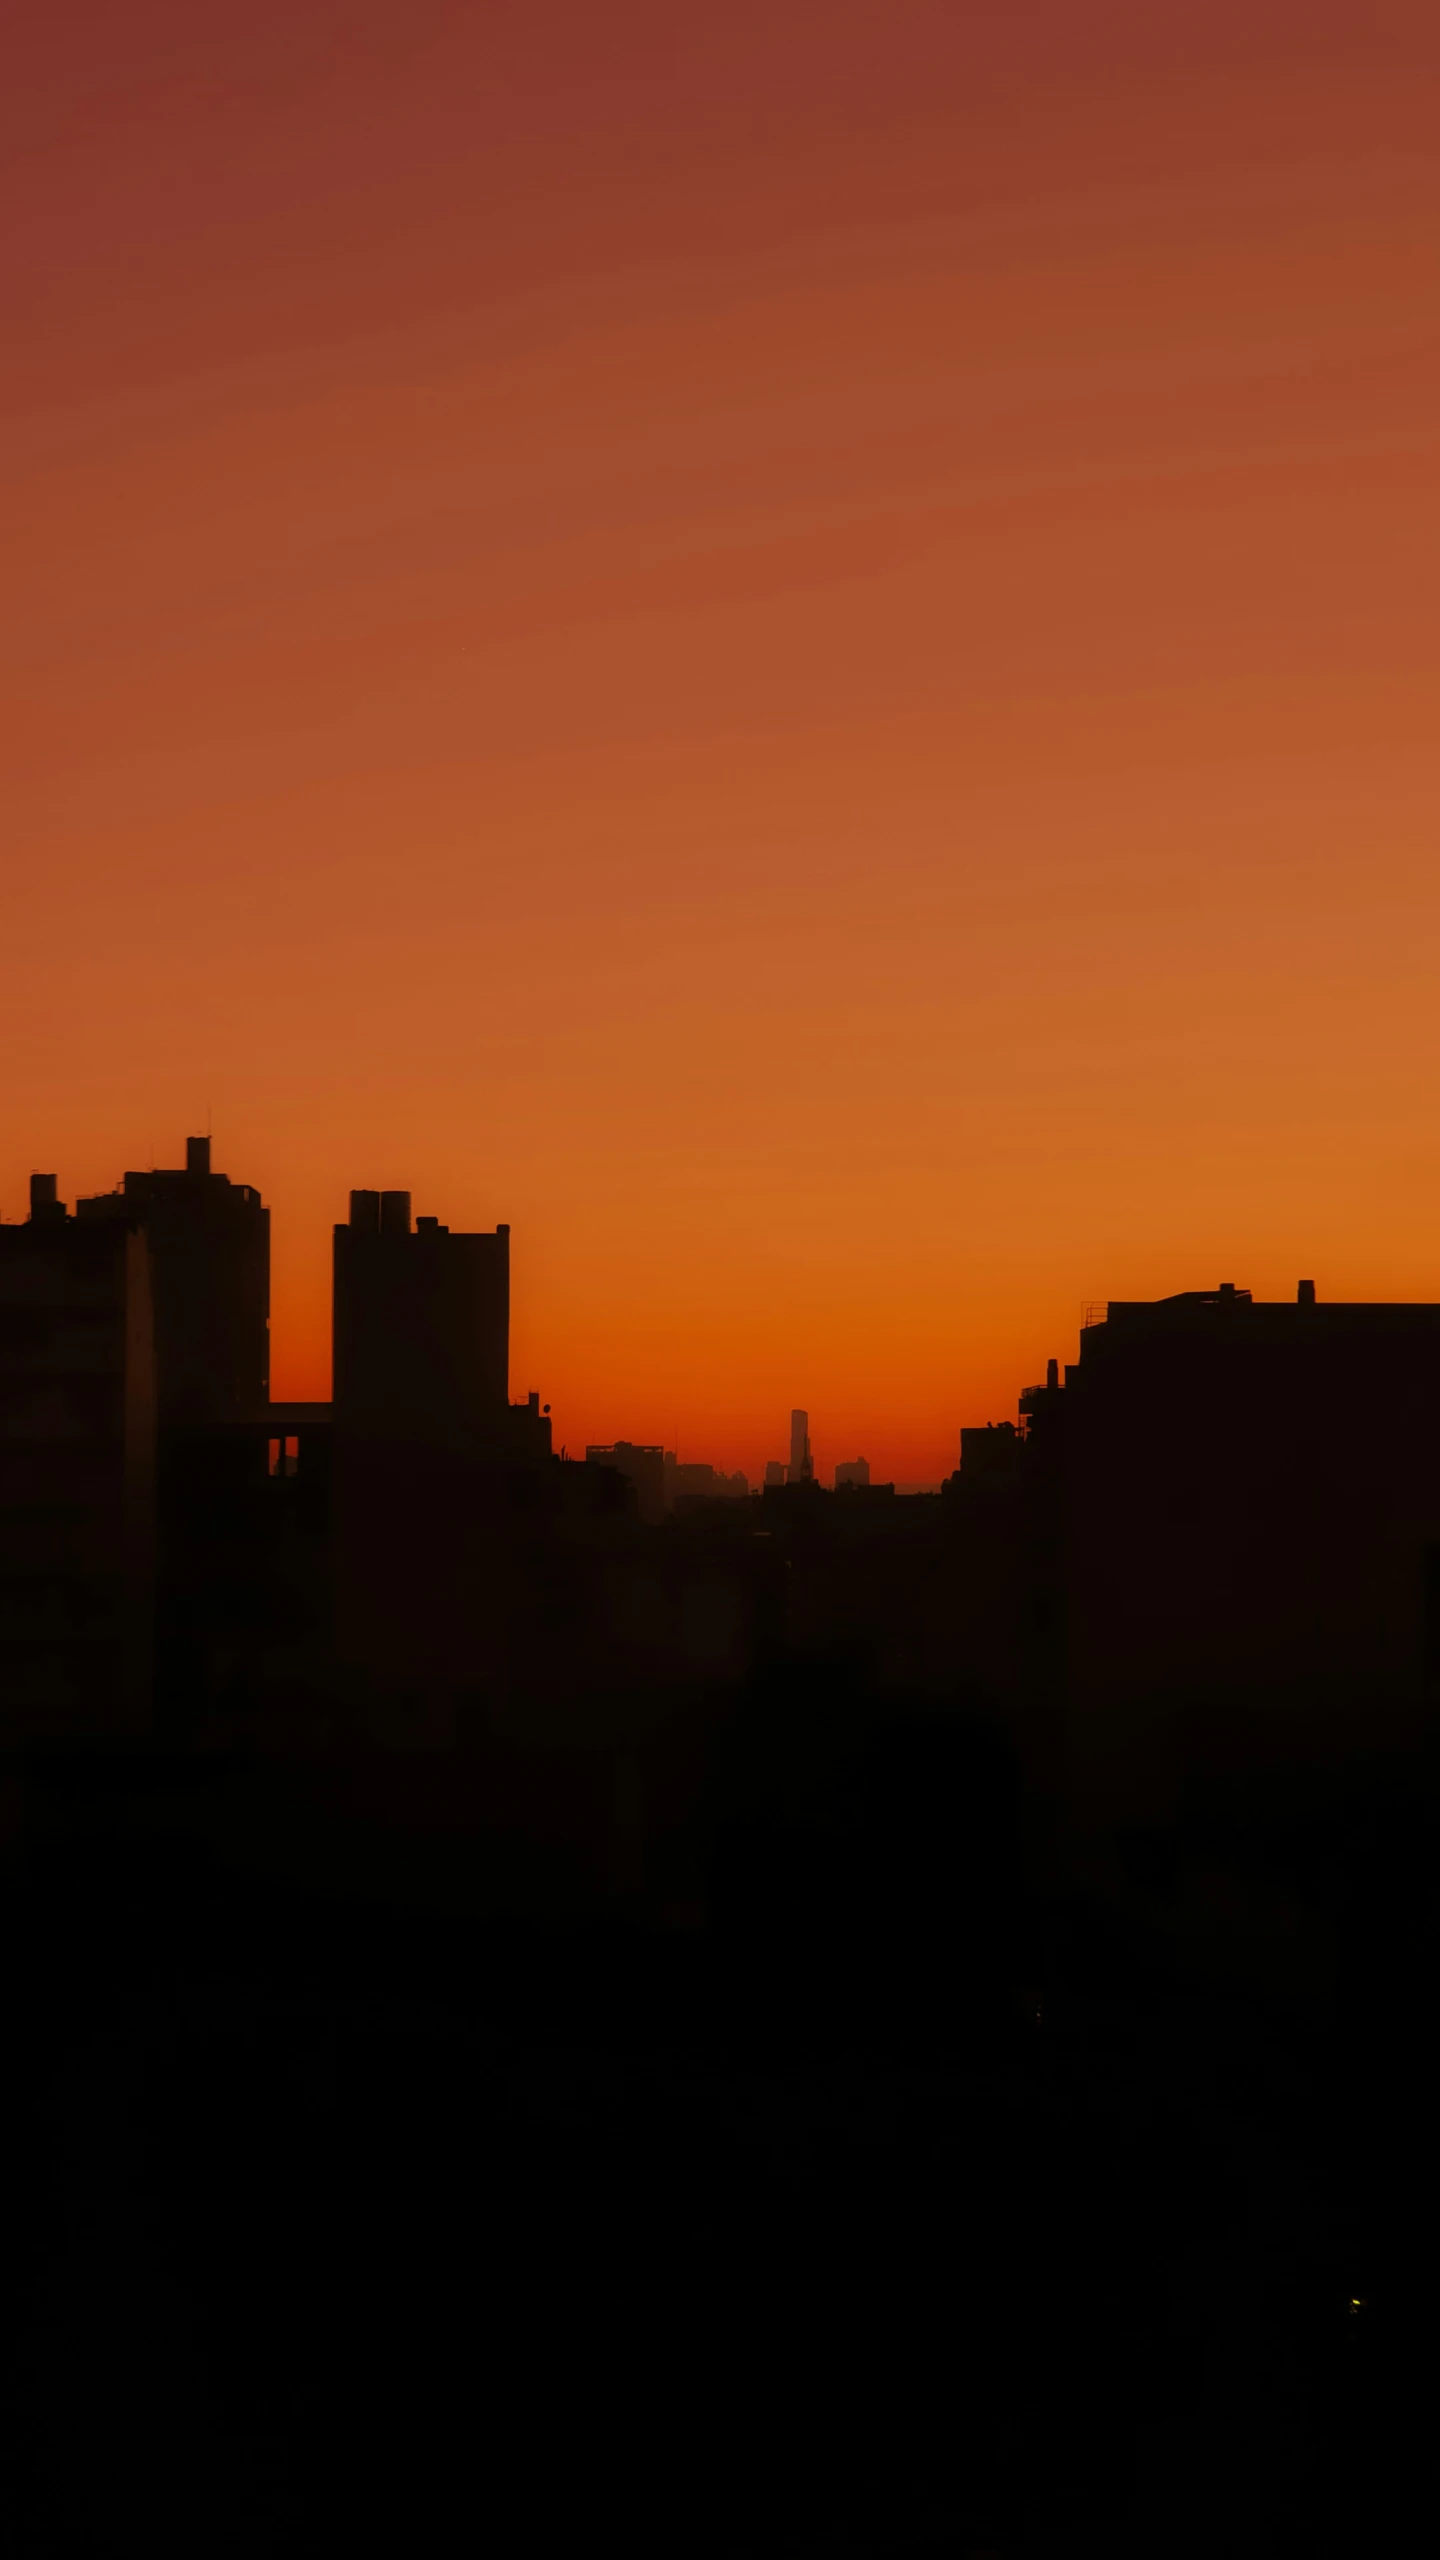 city skyline at sunrise with red sky in background